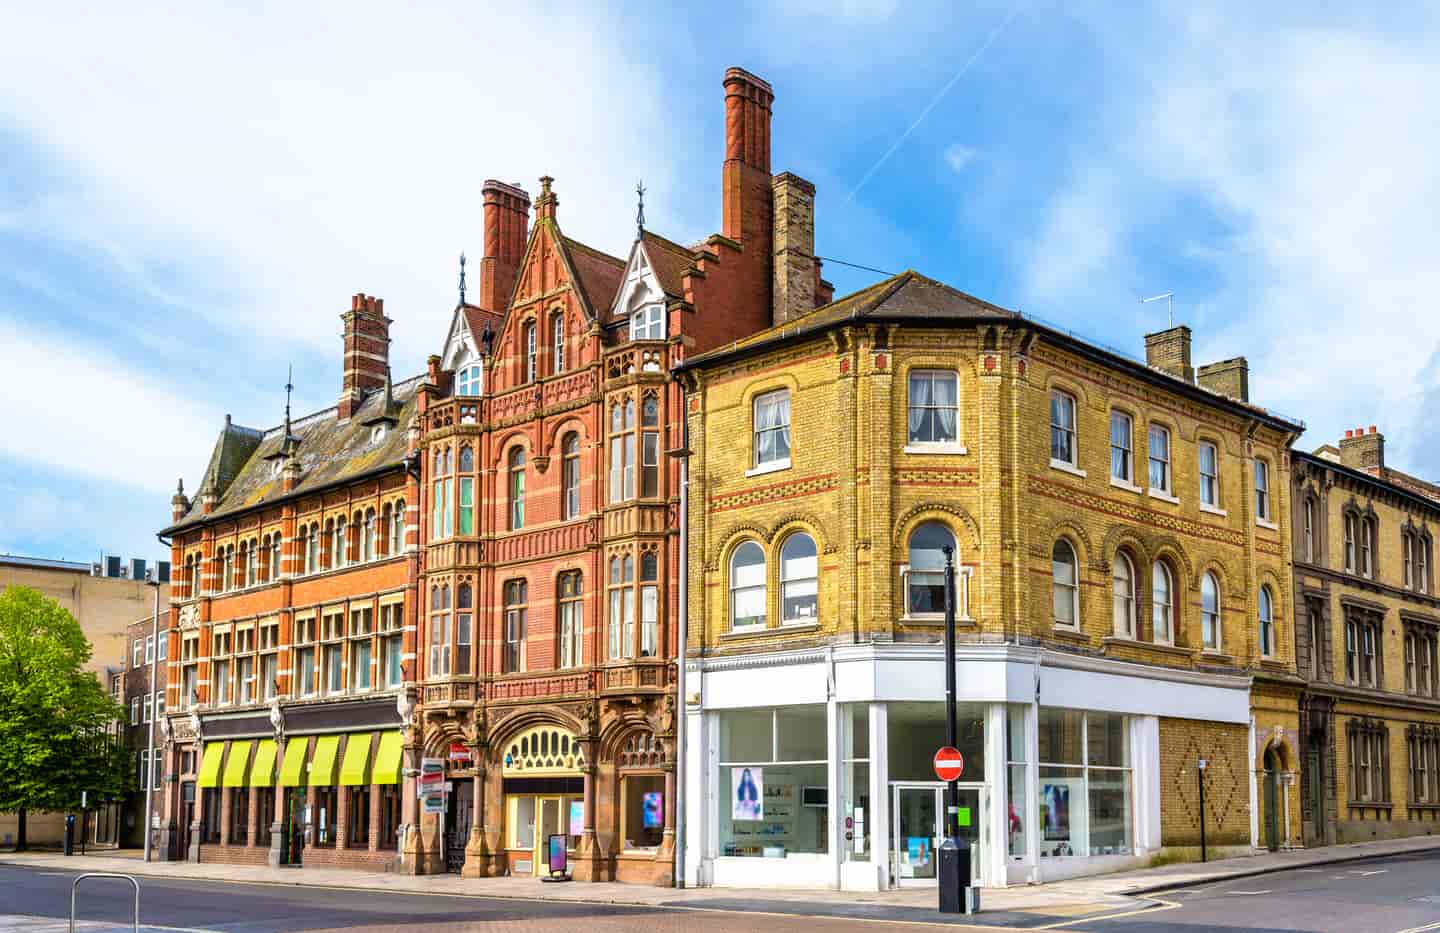 Student Accommodation in Southampton - Houses and shops in Southampton city centre